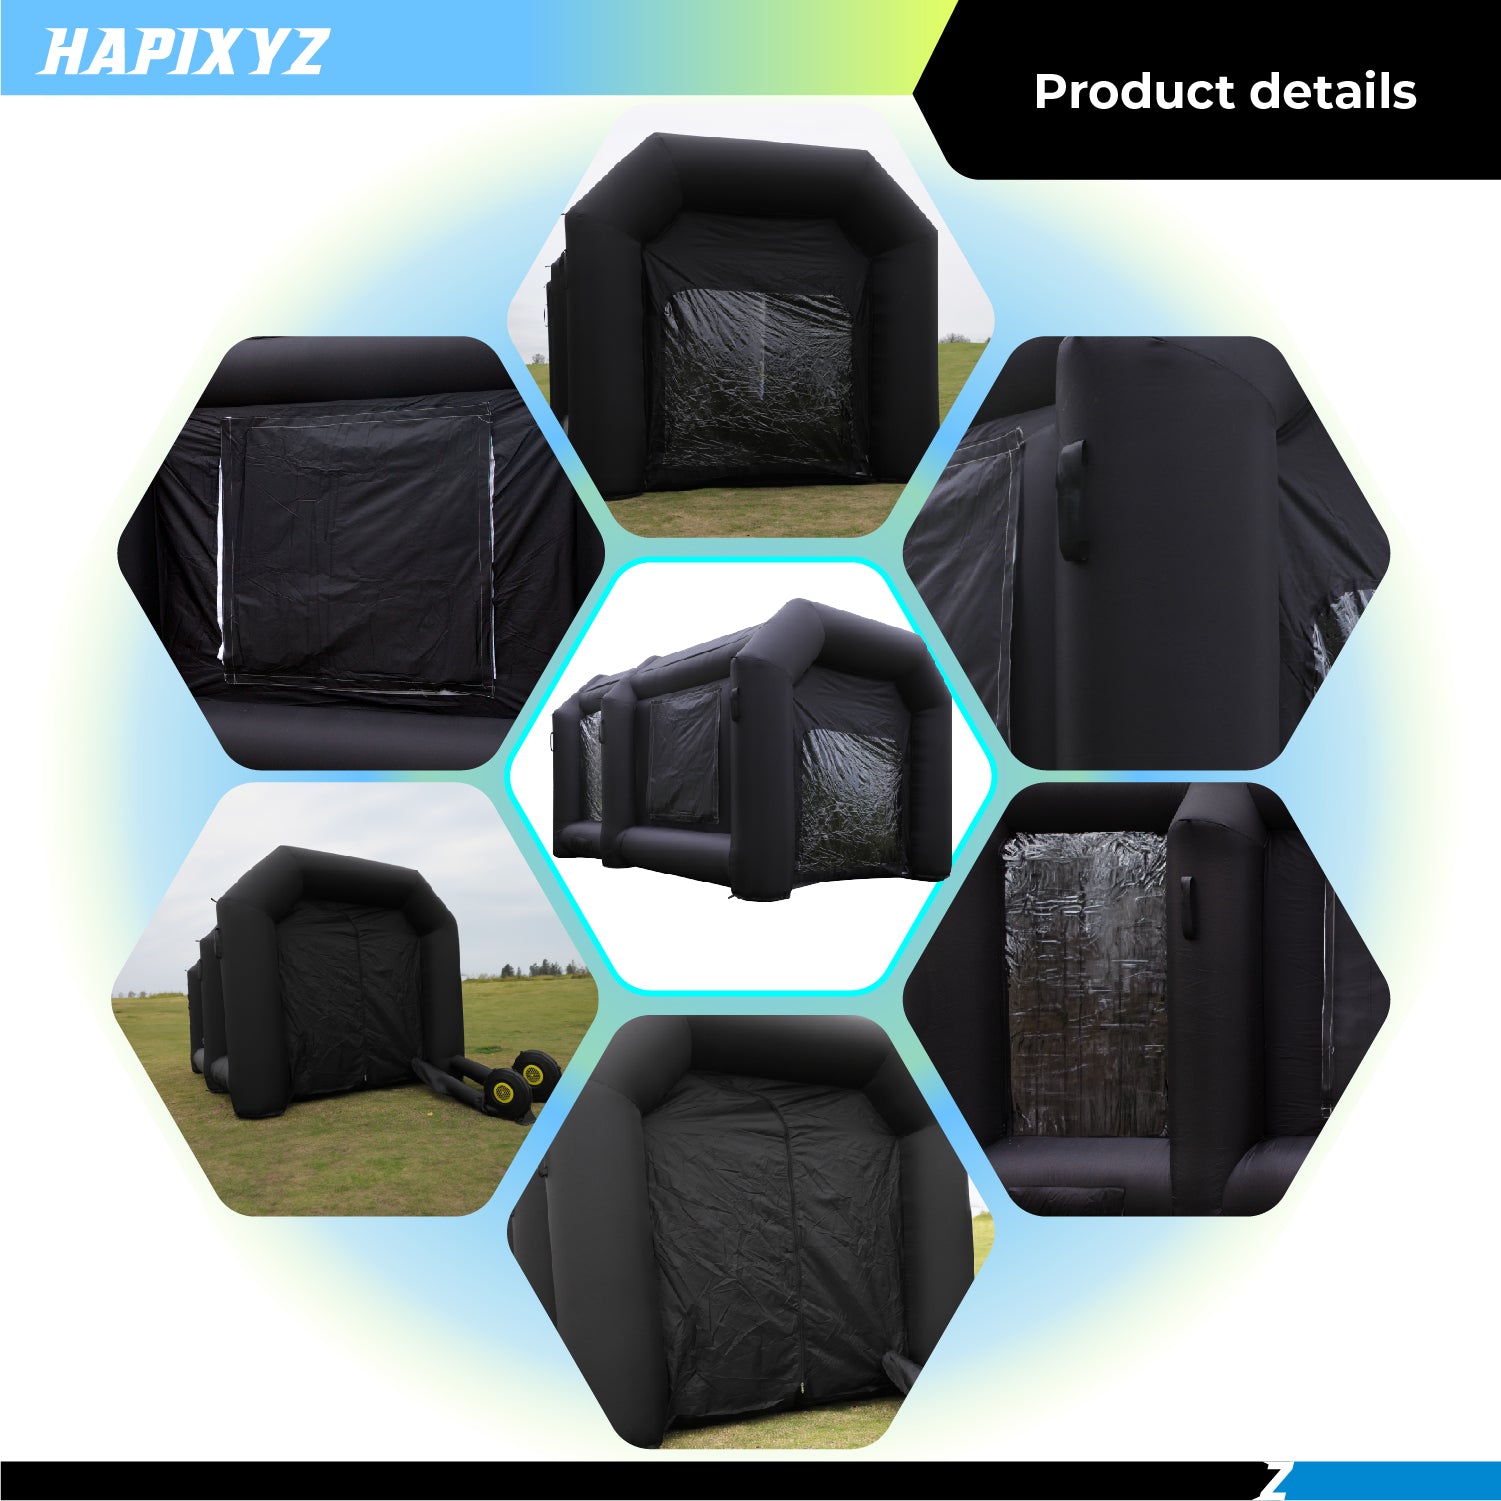 13x8x6.5Ft Black Inflatable Paint Booth Portable Car Spray Booth – HAPIXYZ